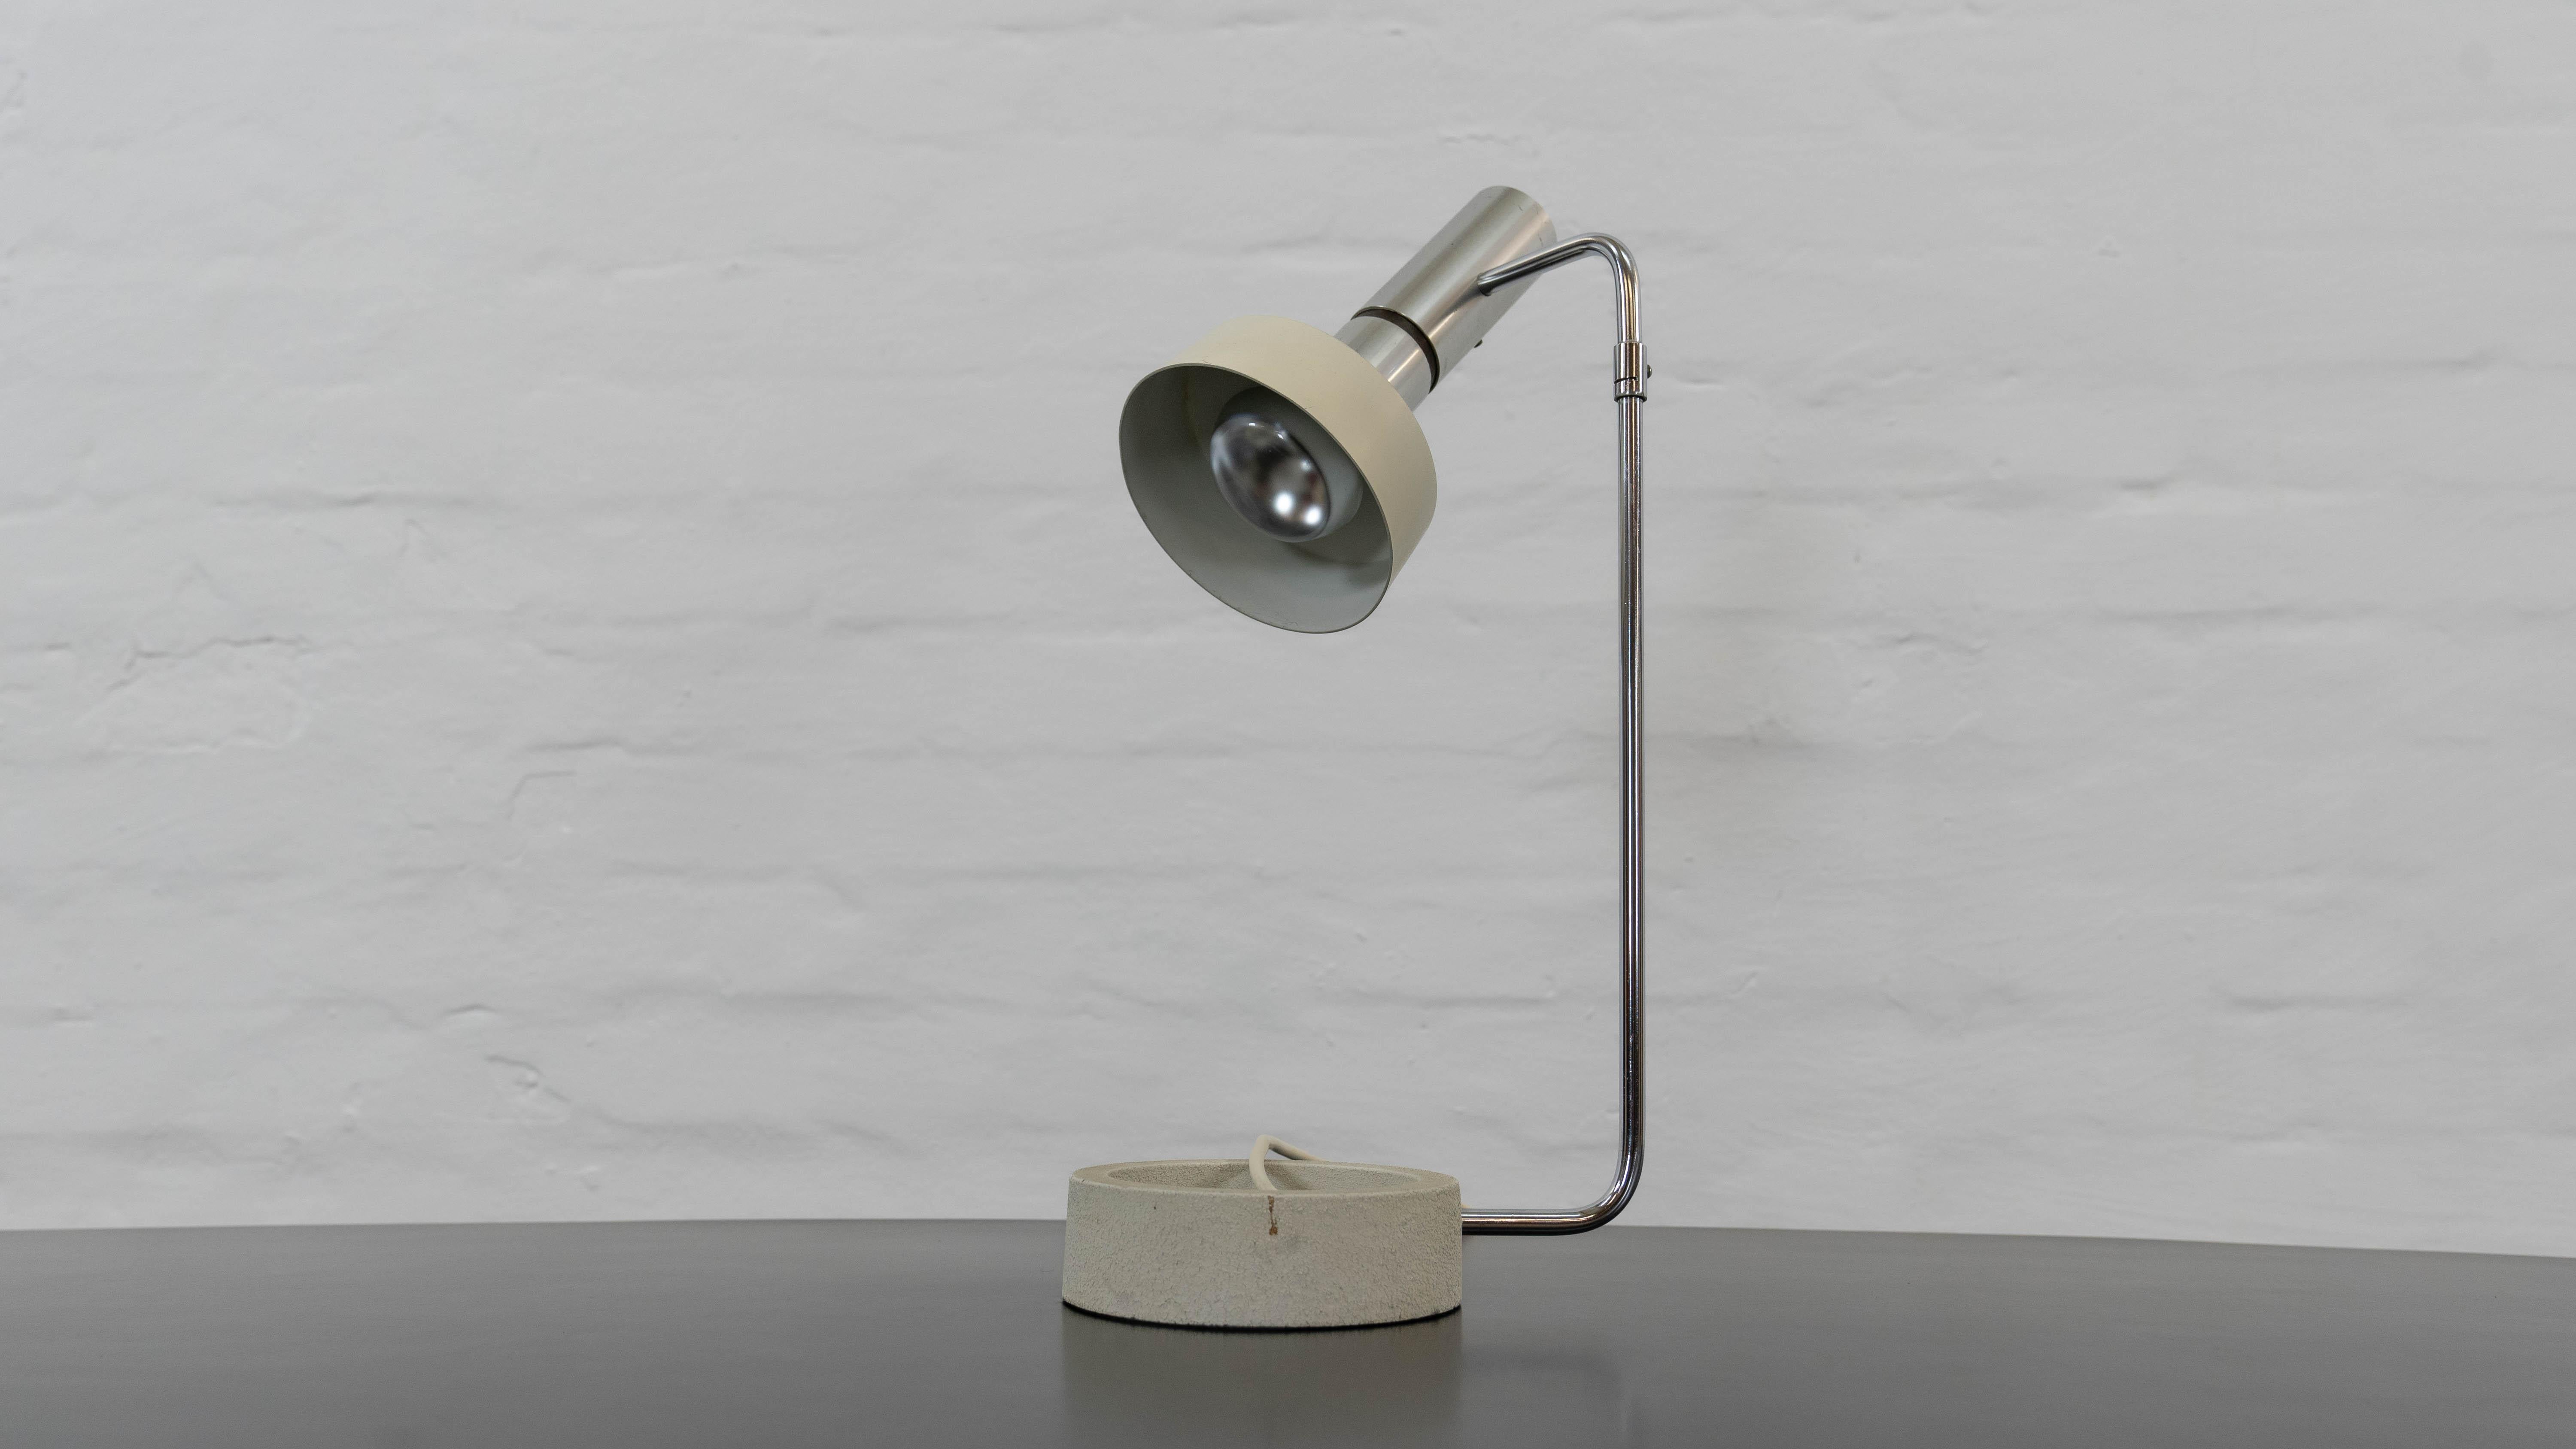 Adjustable Tablelamp , Model “Minilux”. Design and execution from the 1960s by Rico & Rosemarie Baltensweiler. E27 bulb socket, EU-plug. Lampfoot made from cast-iron. Lampshade is made of aluminium, mounted to a adjustable chromed bar. The